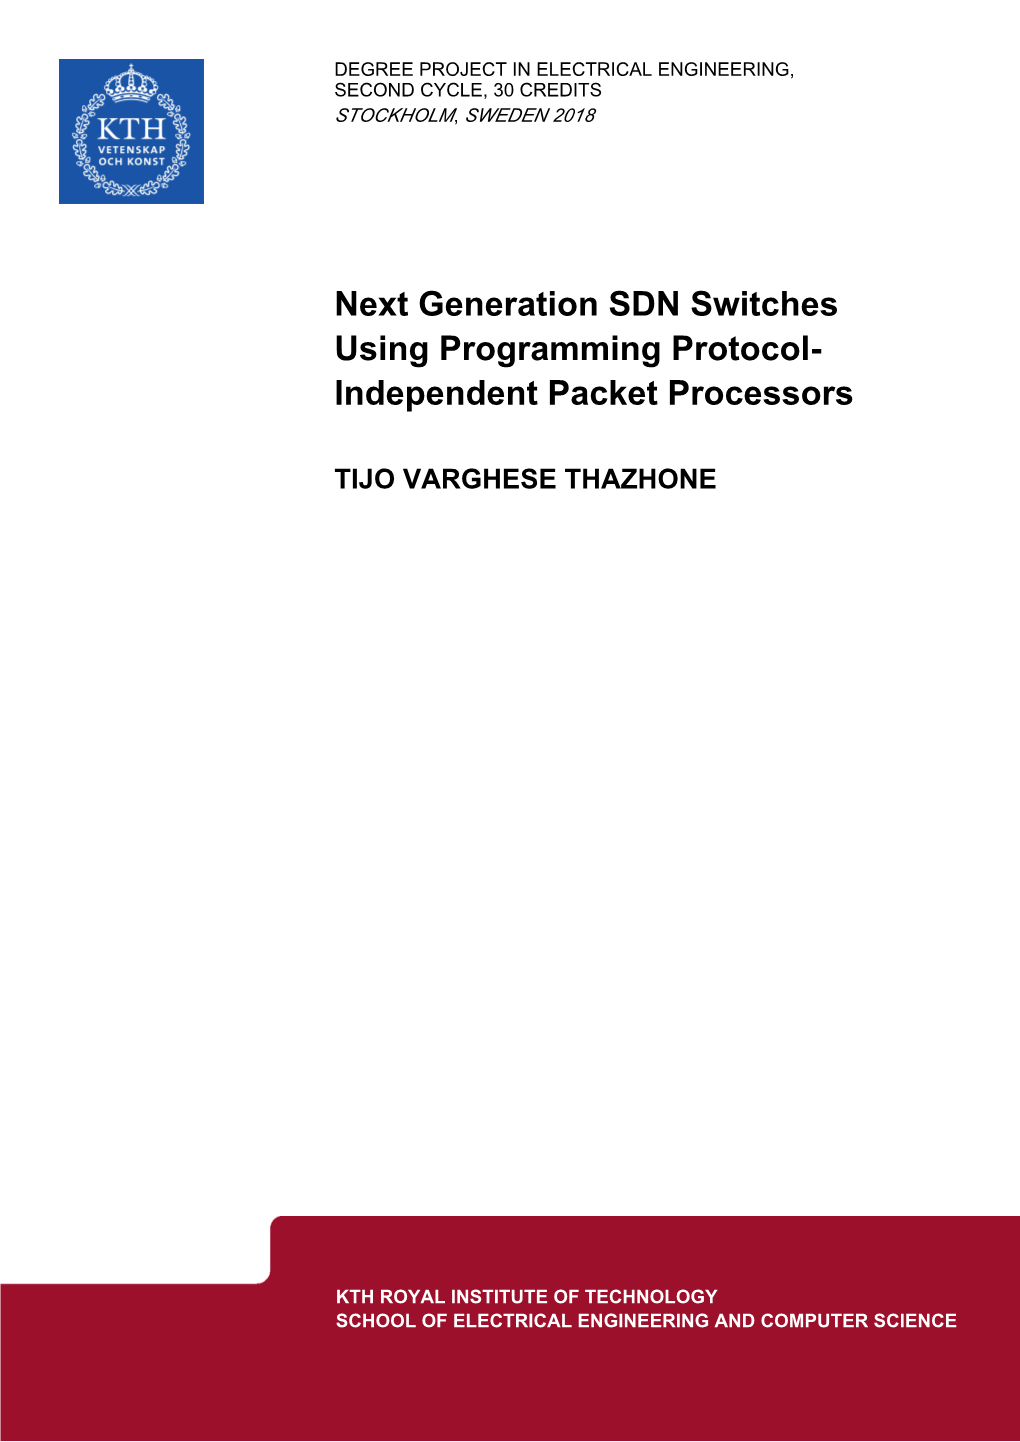 Next Generation SDN Switches Using Programming Protocol-Independent Packet Processors